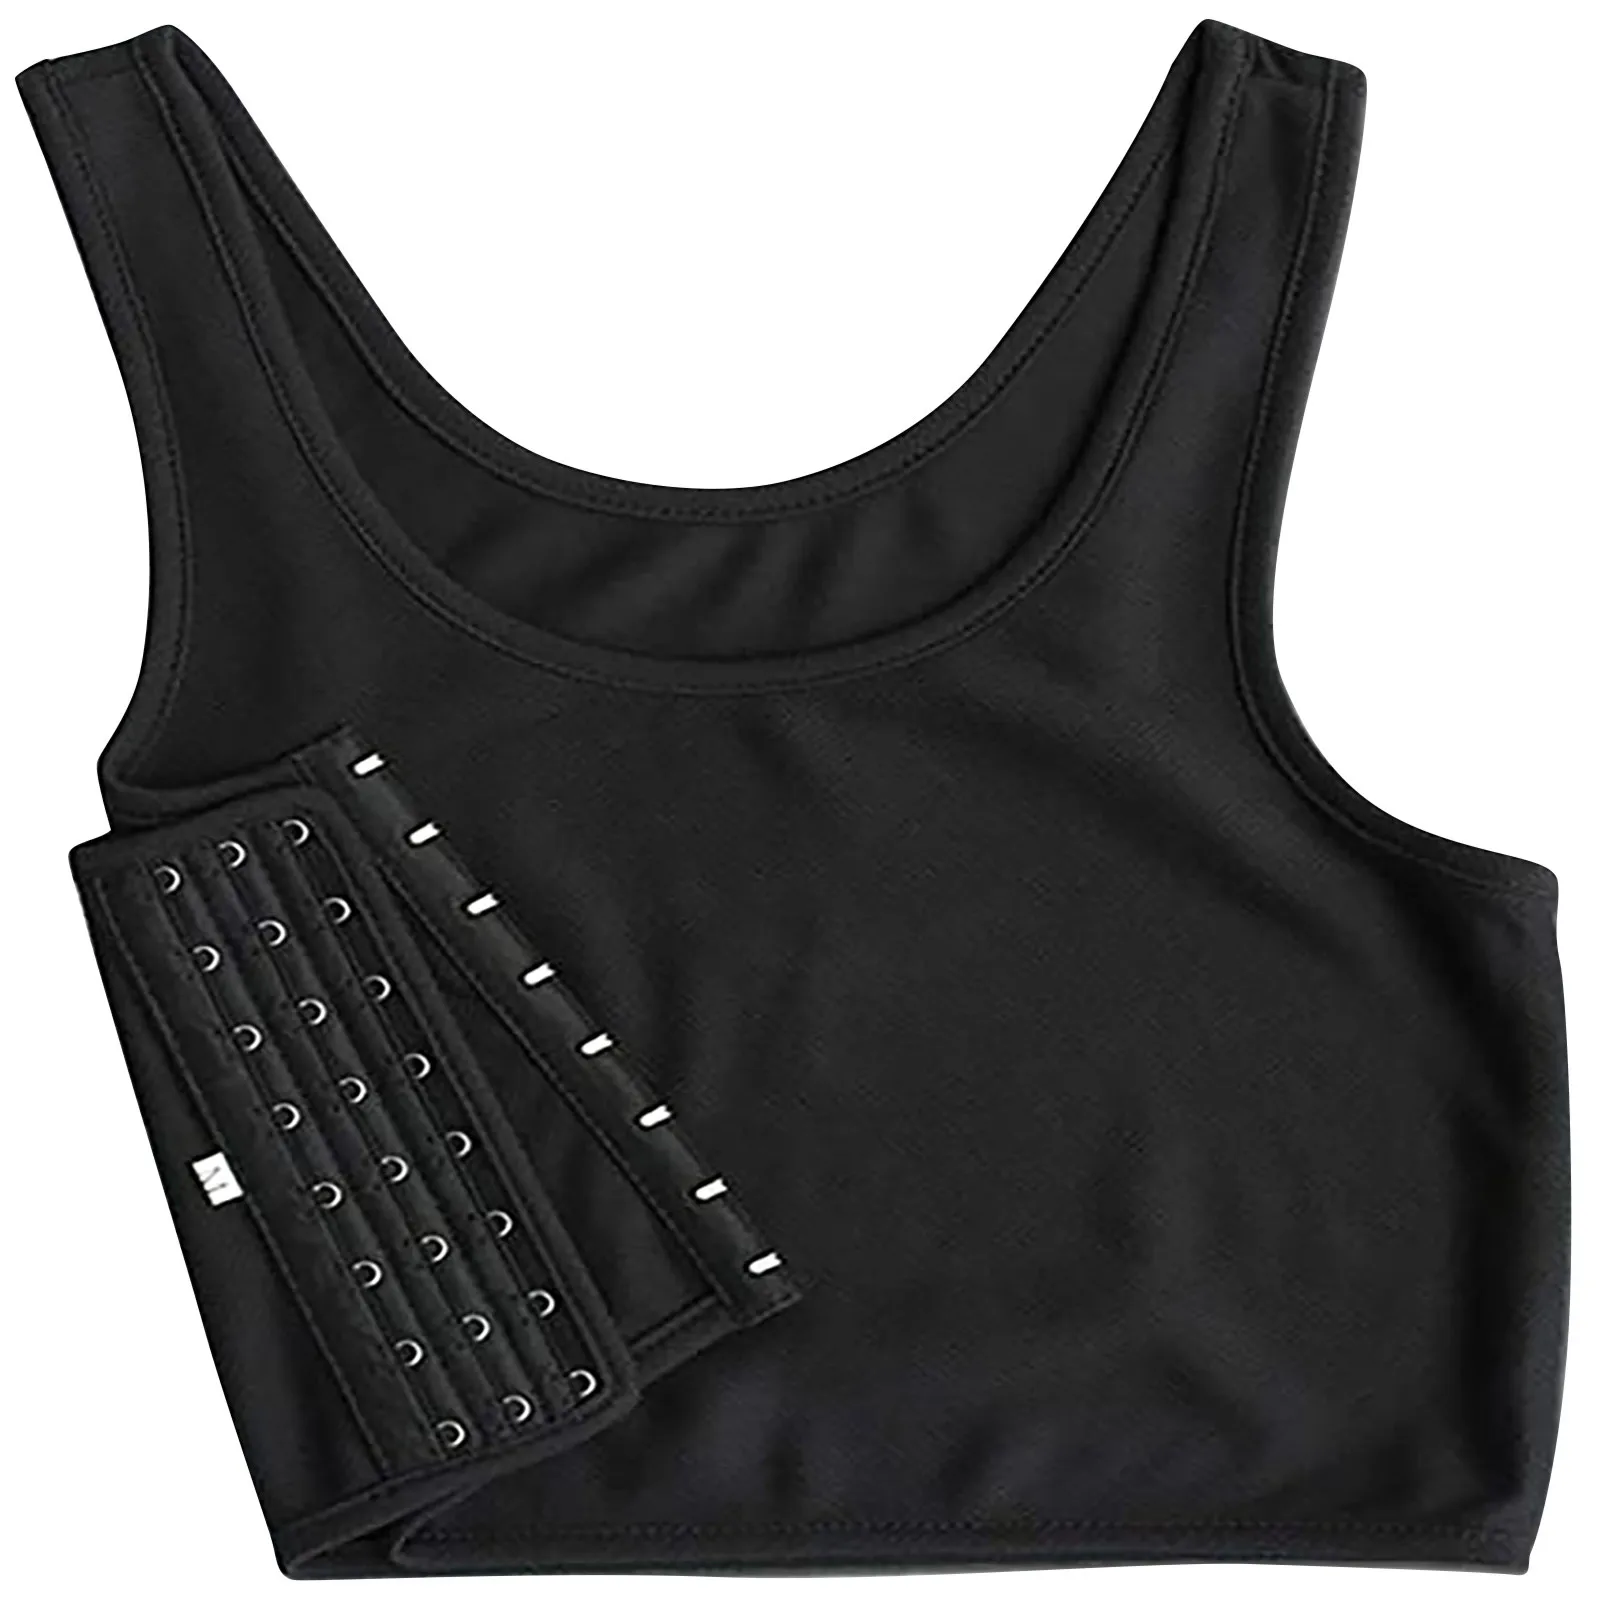 Breathable Buckle Tank Top Short Chest Breast Tran Vest Compression Binder Women Sleeveless Camisole Short Tank Tee Tops 30# sexy camisole